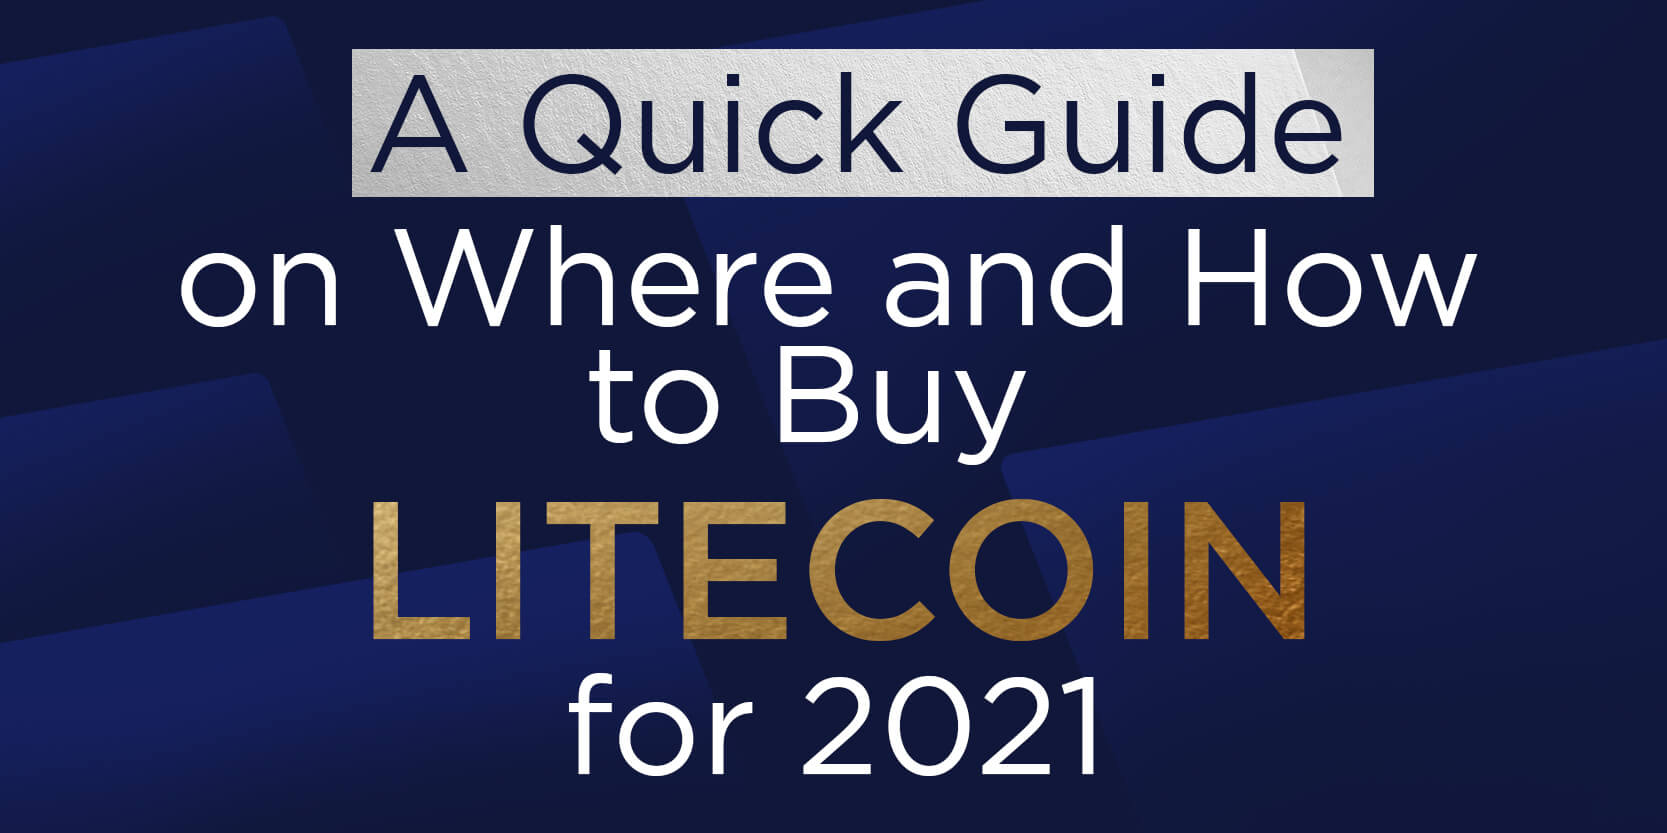 A Quick Guide on Where and How to Buy Litecoin for 2021 ...